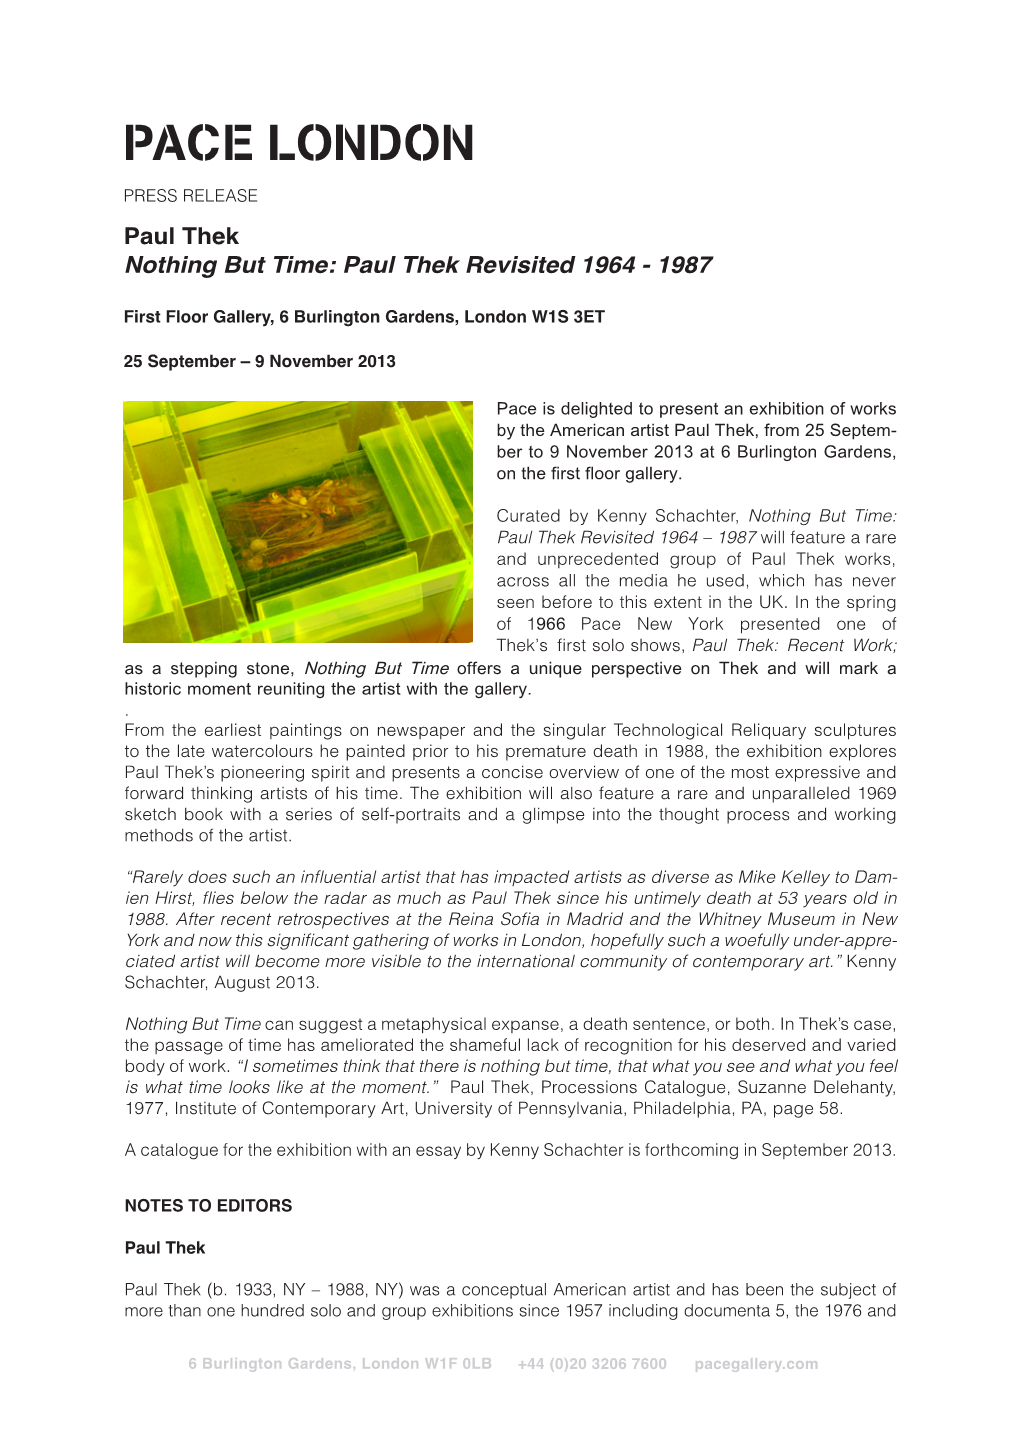 Paul Thek Nothing but Time: Paul Thek Revisited 1964 - 1987